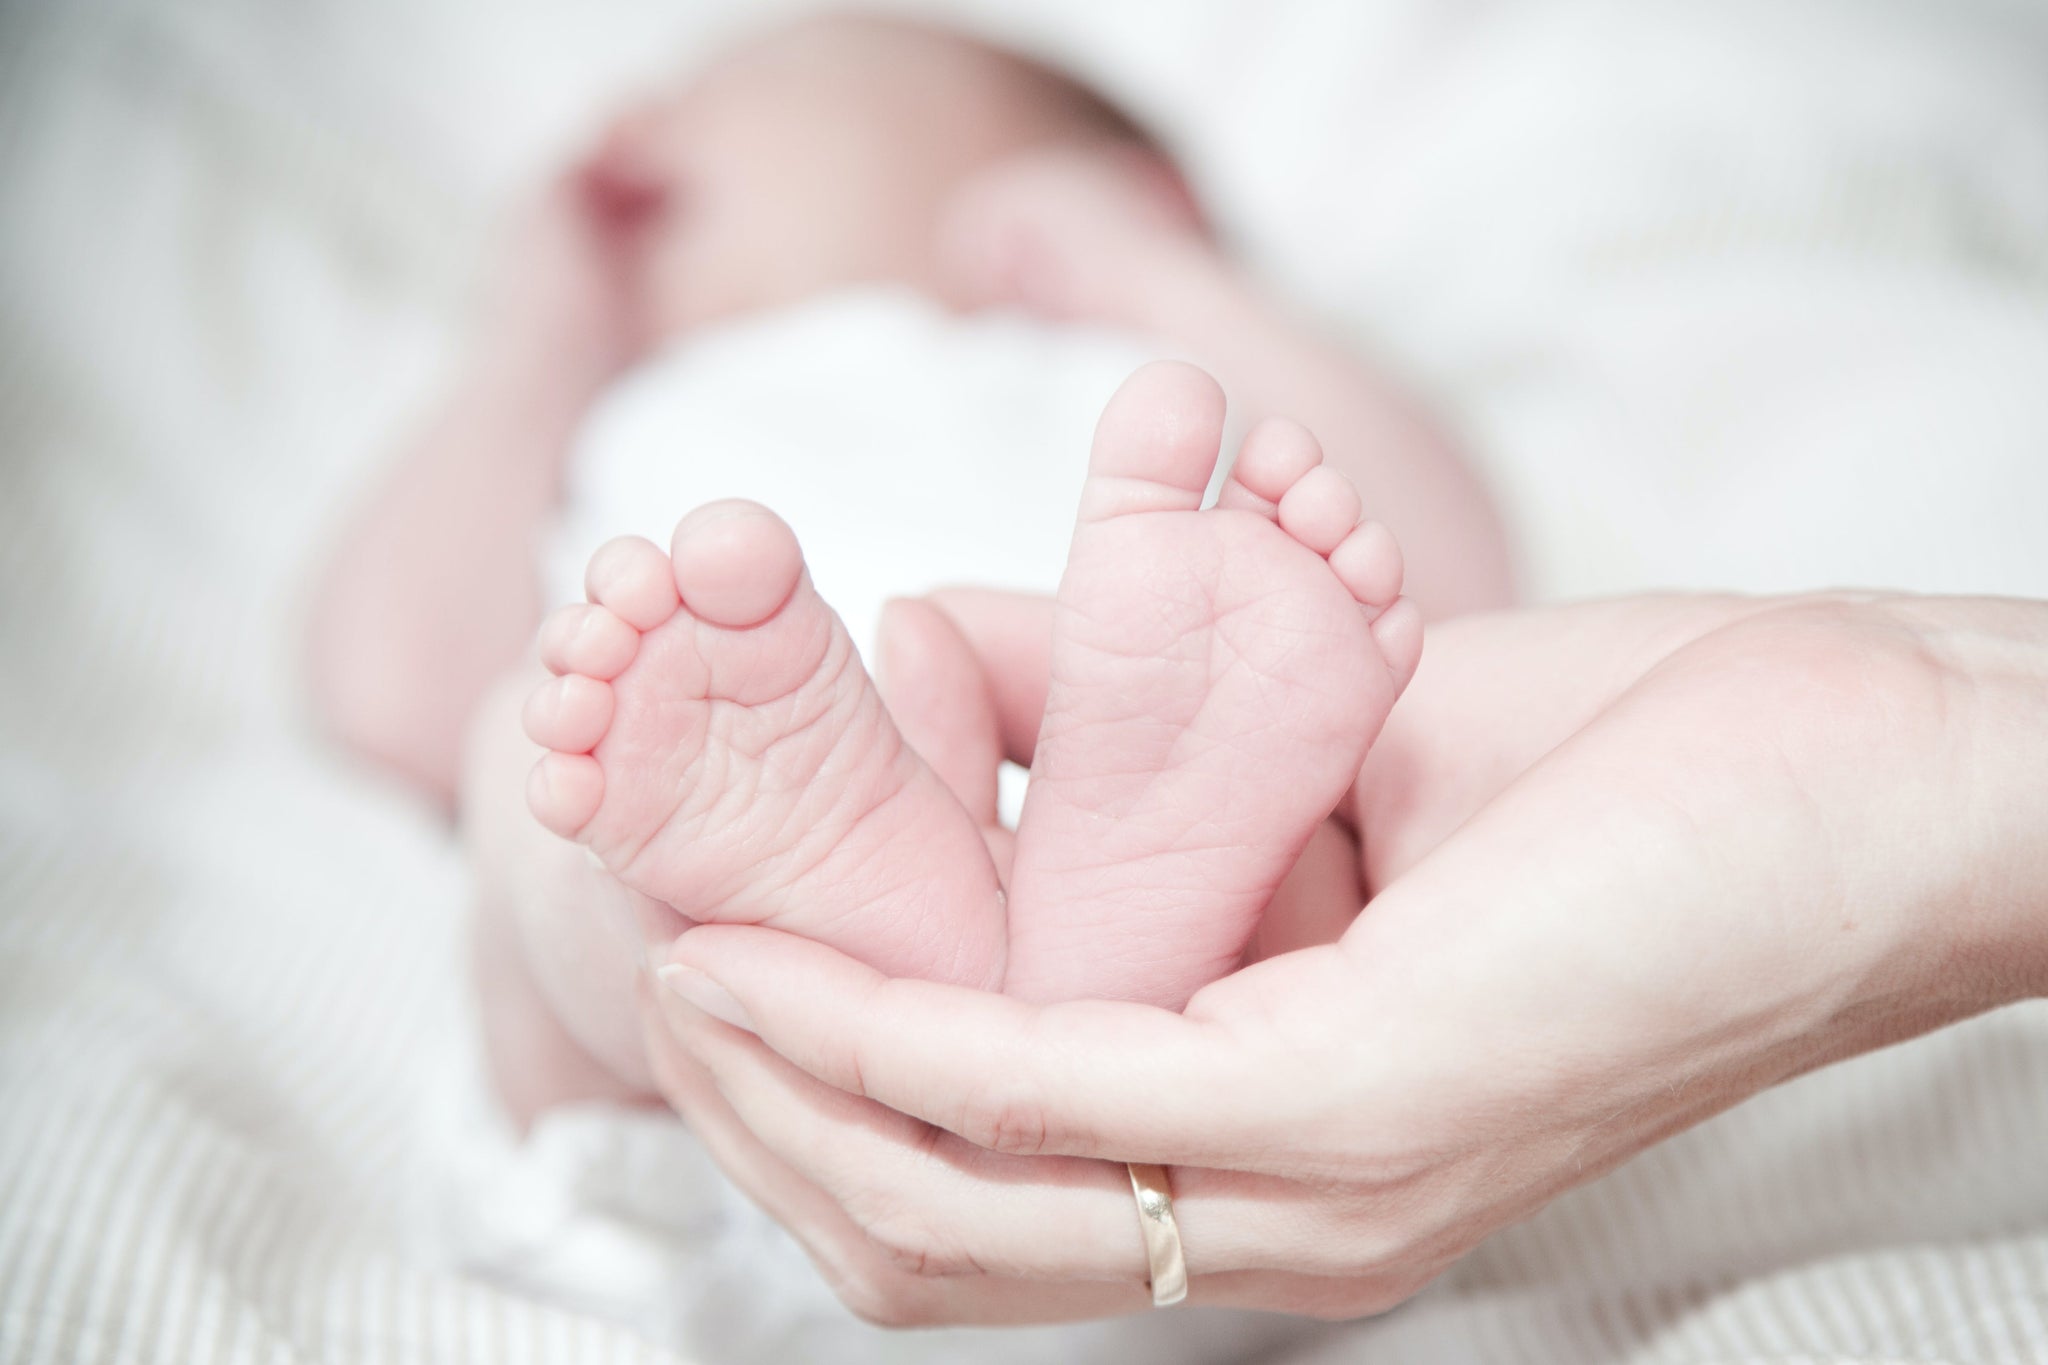 Foreground shows infant feet held by parent's hand.